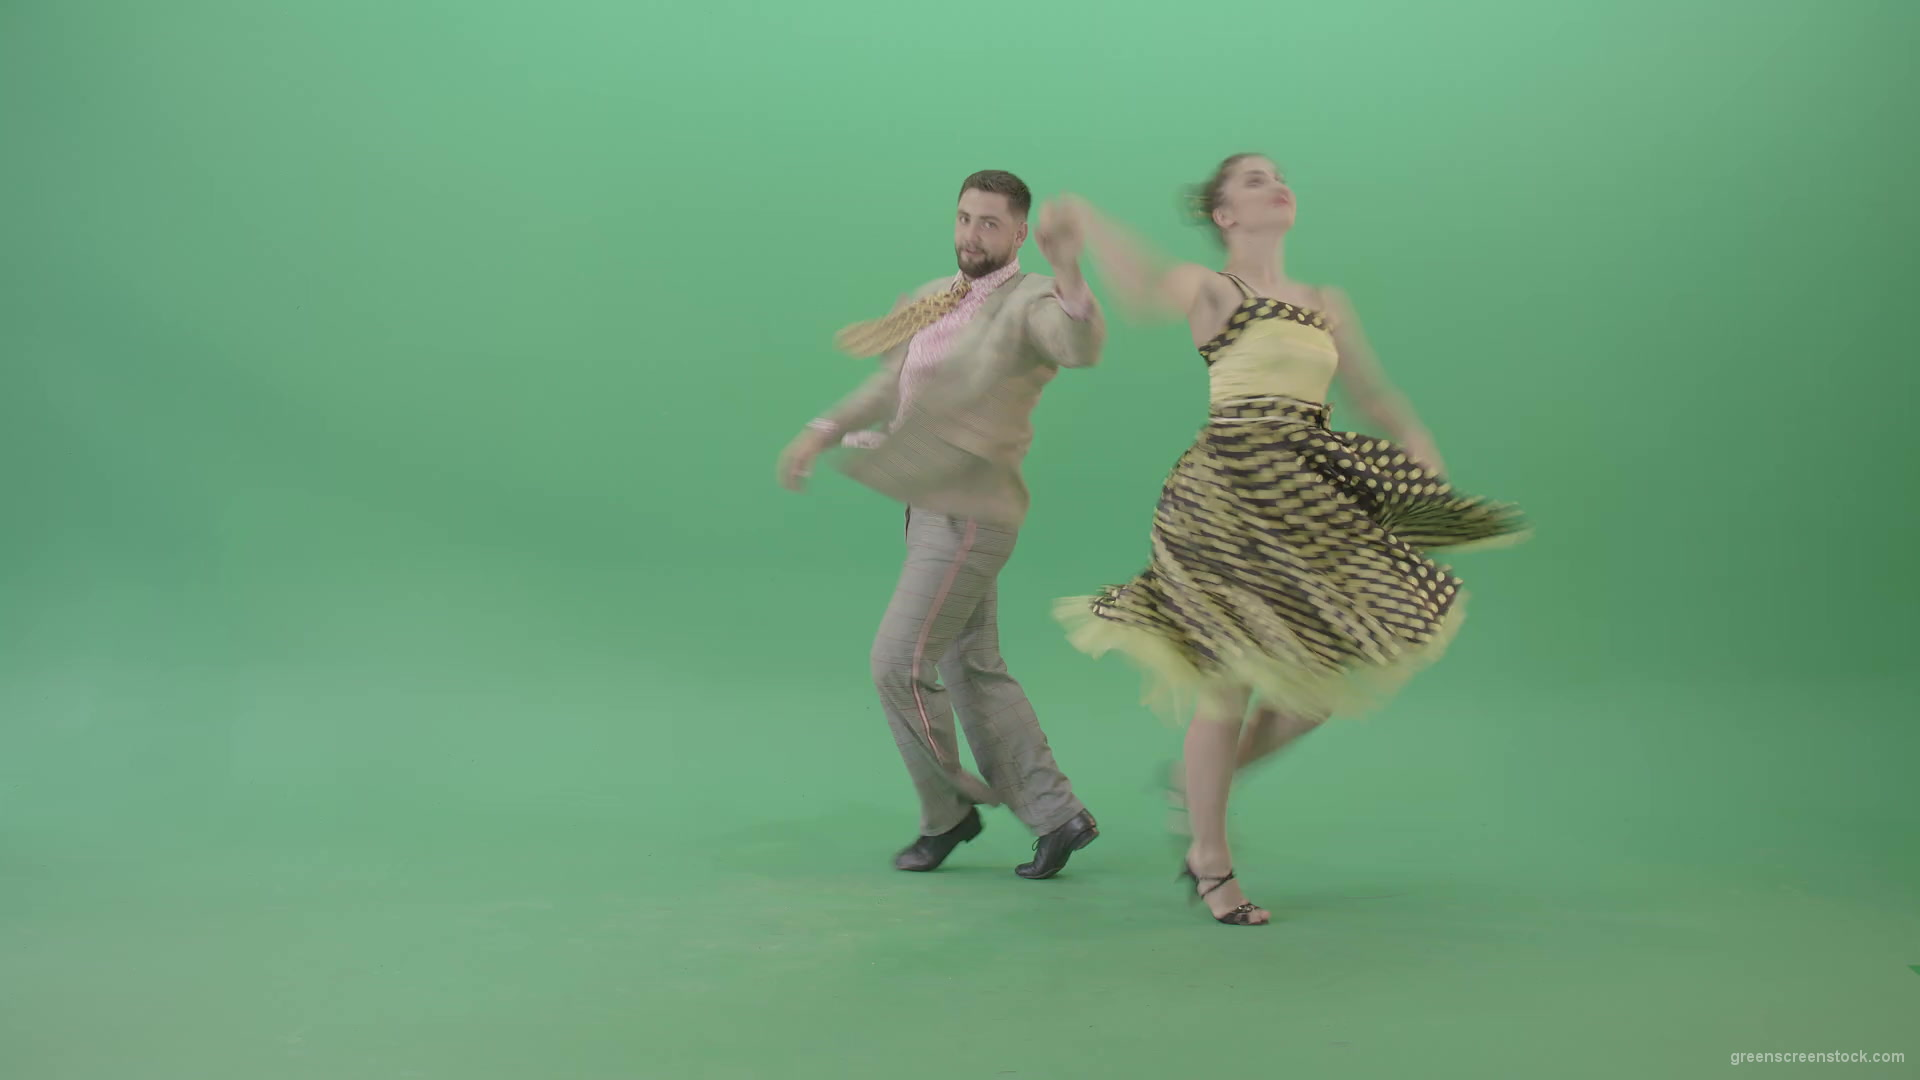 Lovely-couple-jumping-in-Boogie-woogie-dance-isolated-on-Green-Screen-4K-Video-Stock-Footage-1920_006 Green Screen Stock